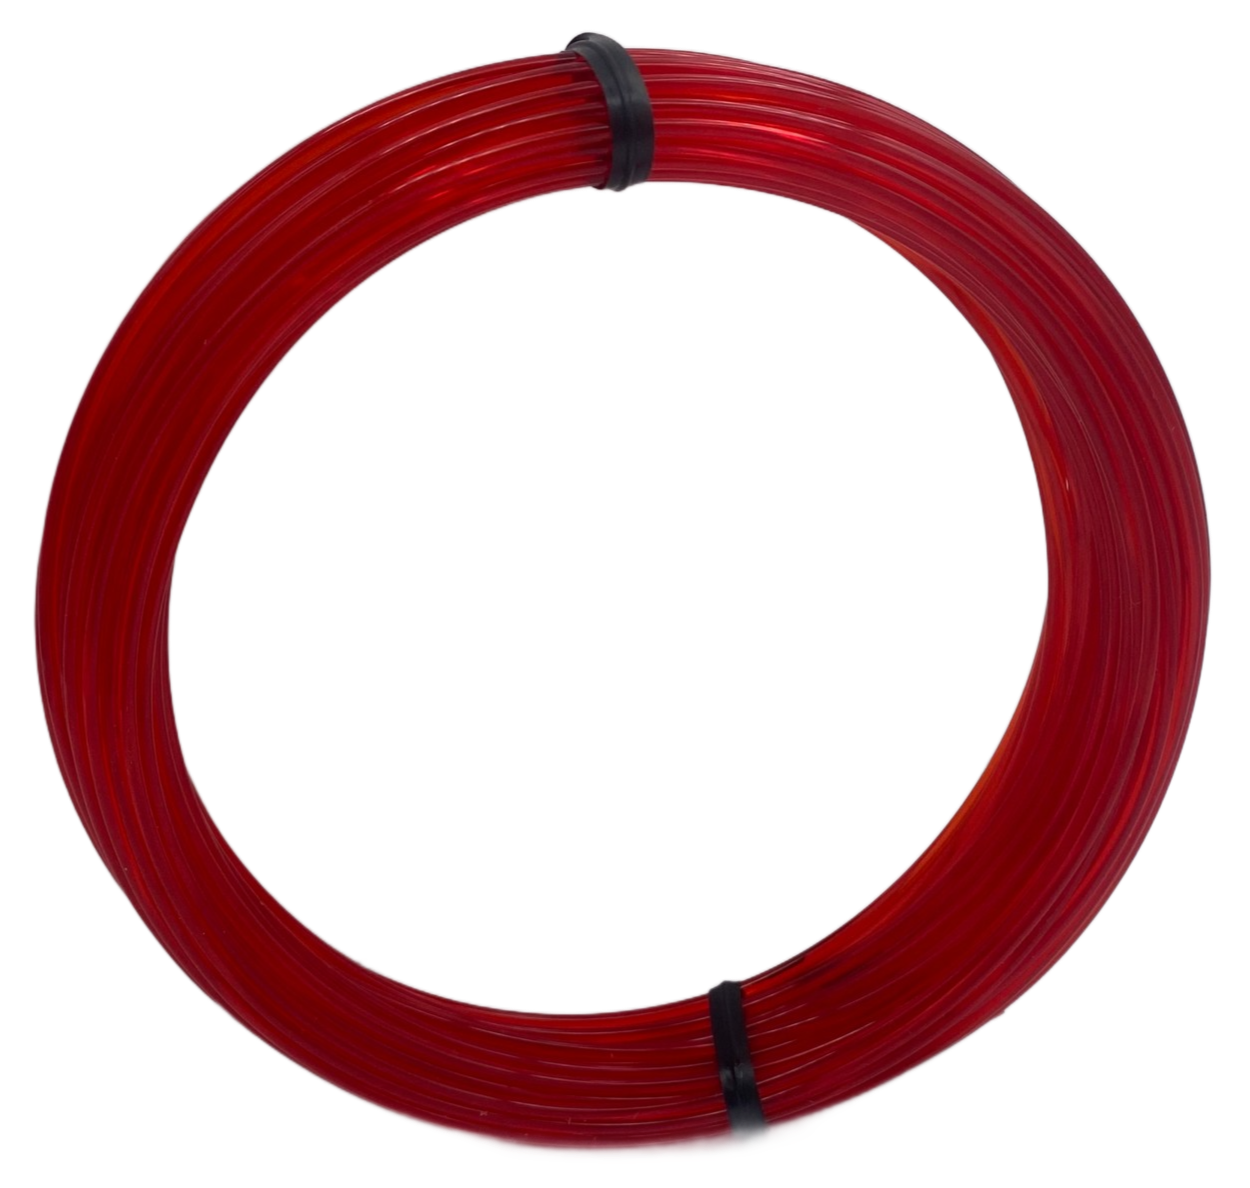 Sample Coil PLA - Gemstone Ruby Red Translucent